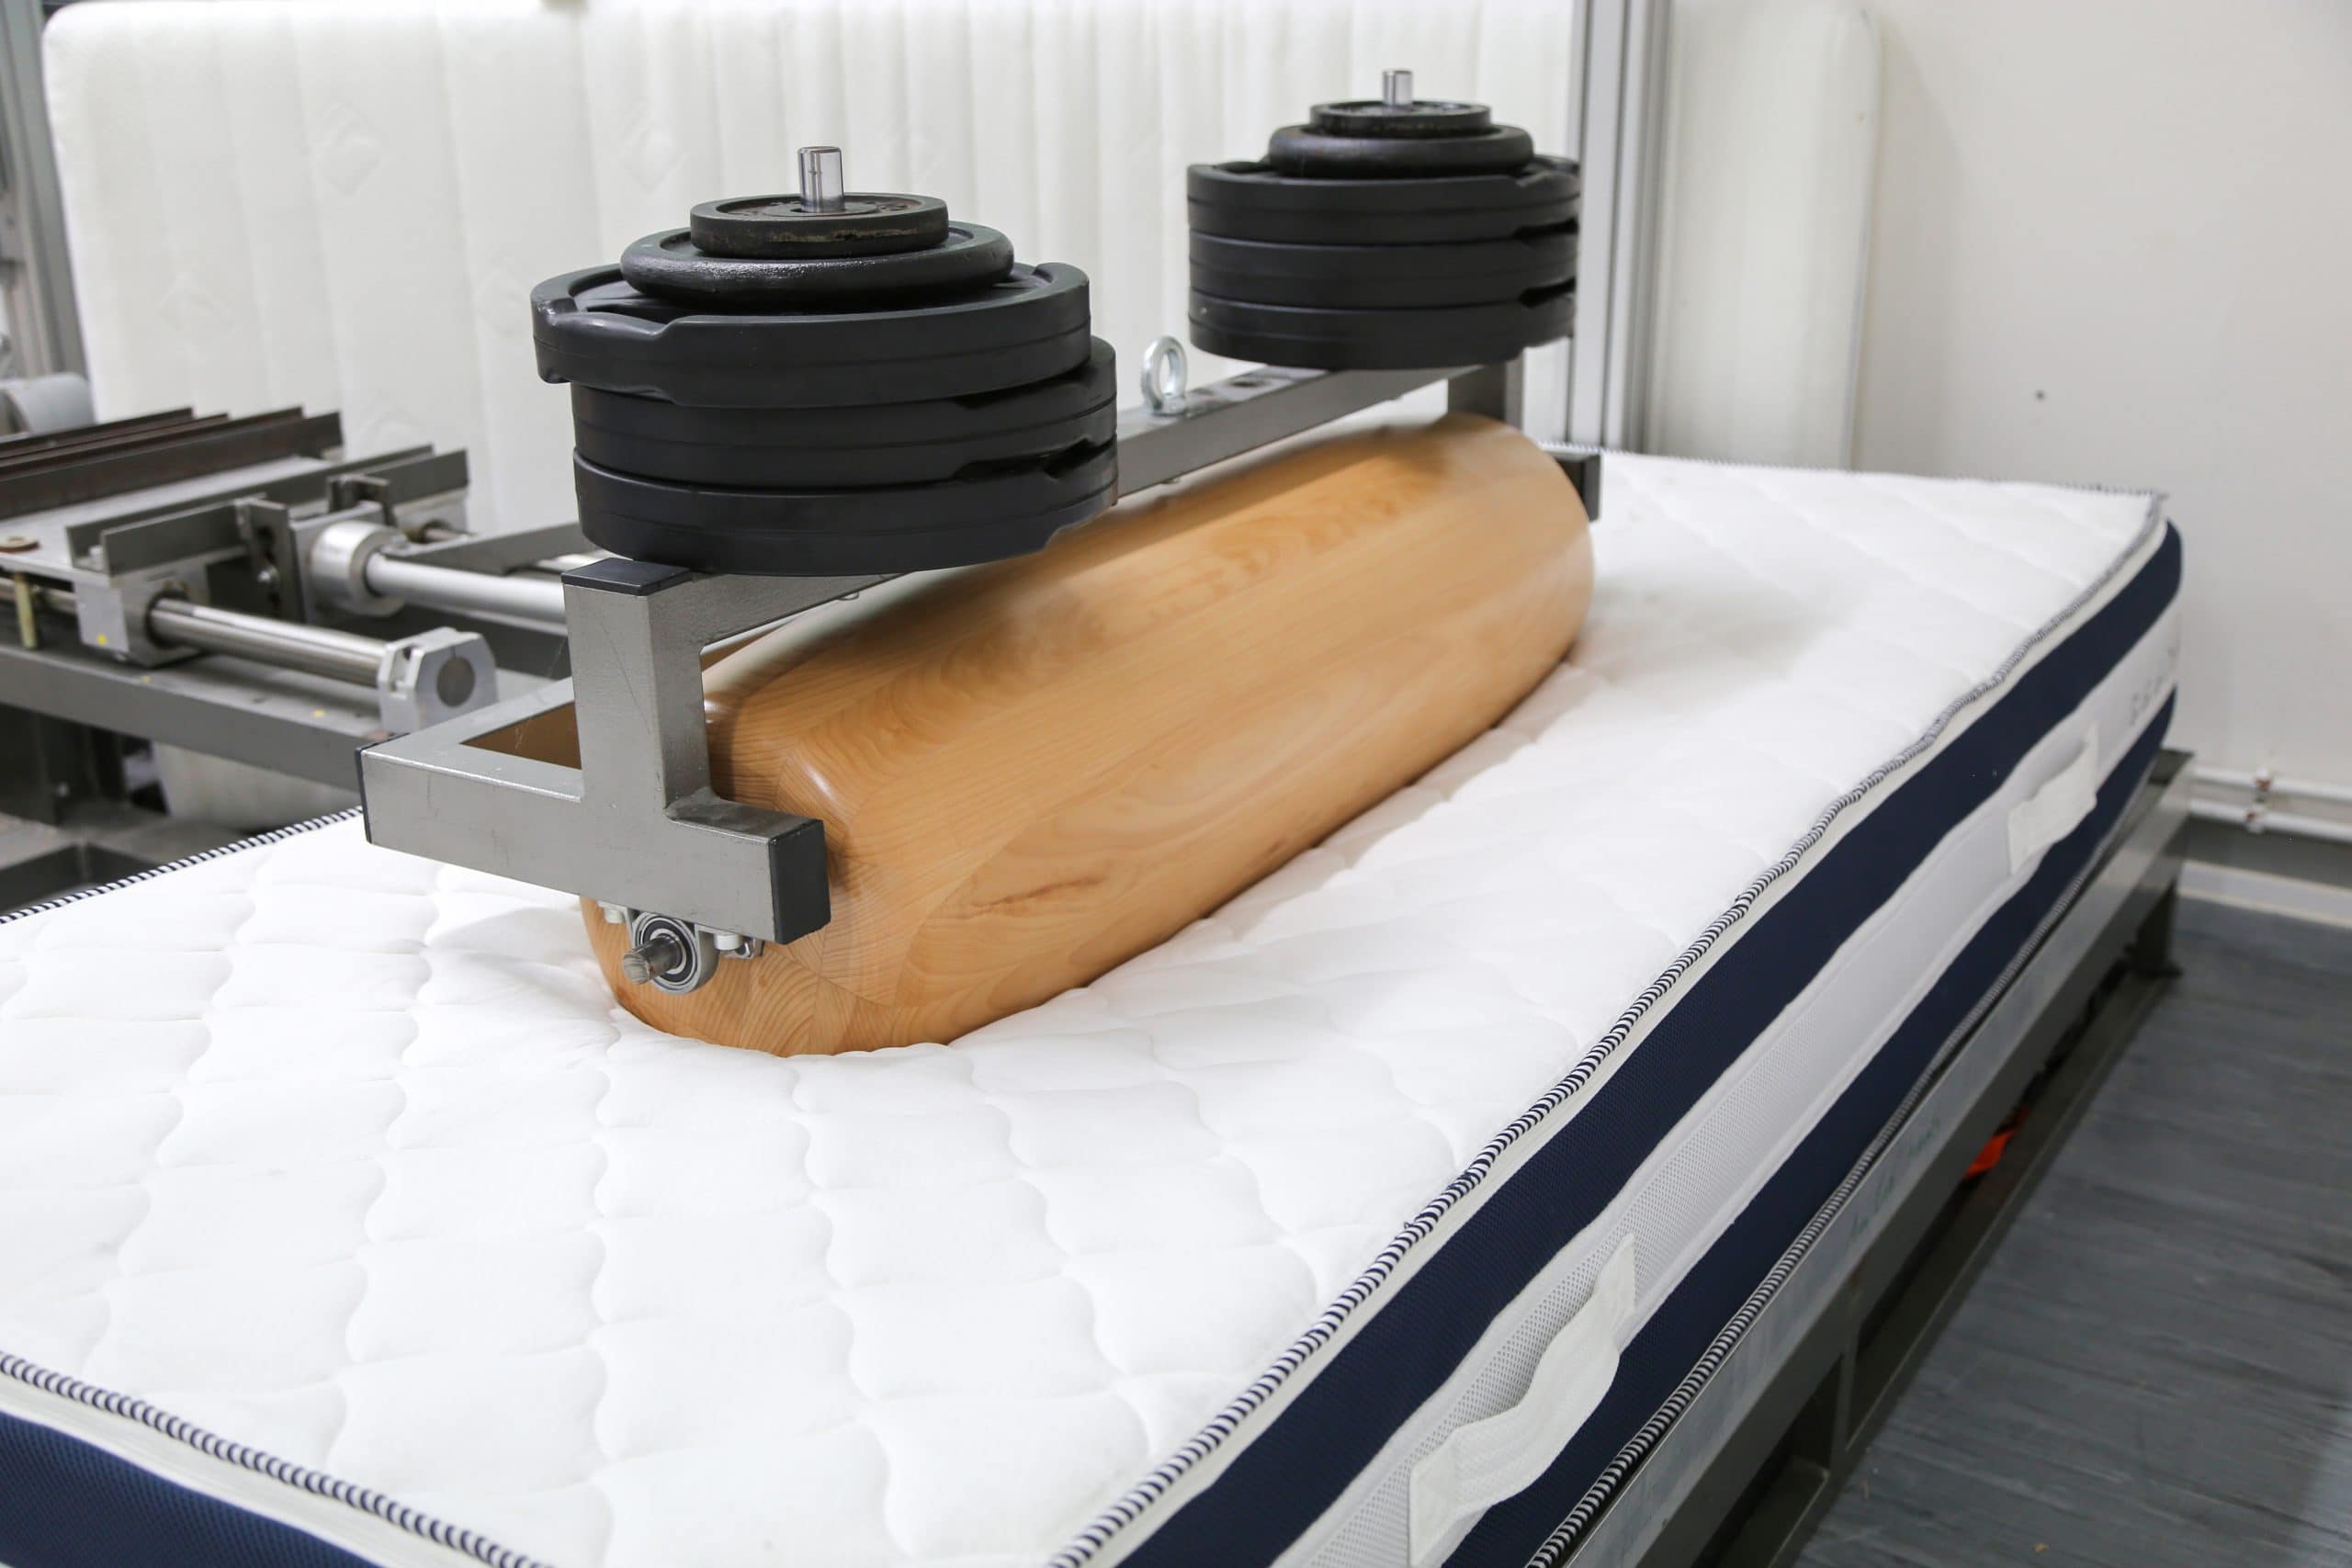 Continuous load tested on mattresses